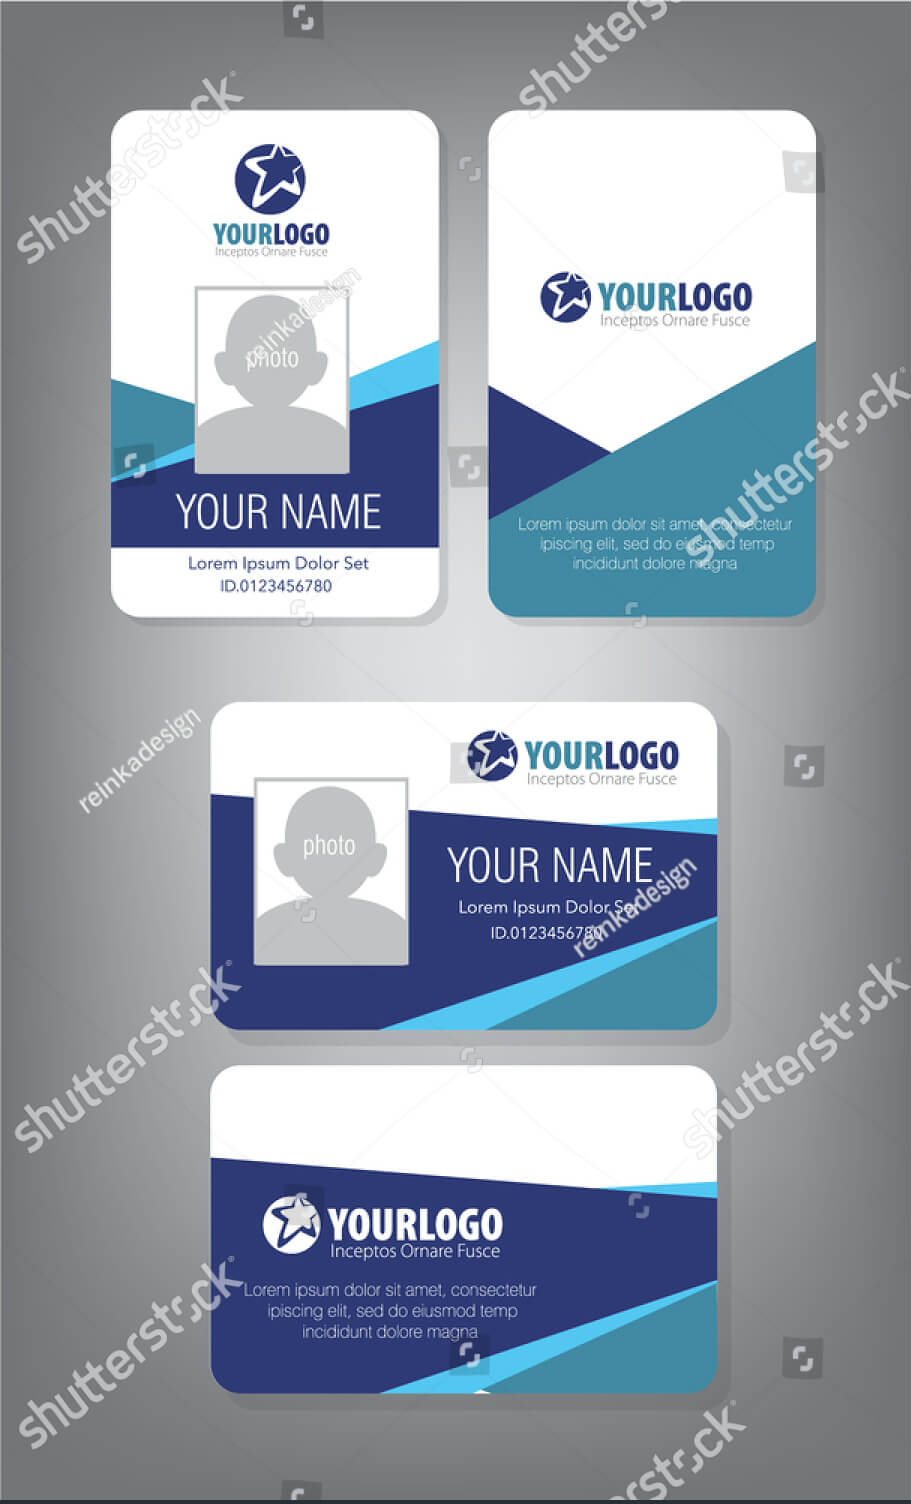 43+ Professional Id Card Designs – Psd, Eps, Ai, Word | Free With Id Card Design Template Psd Free Download